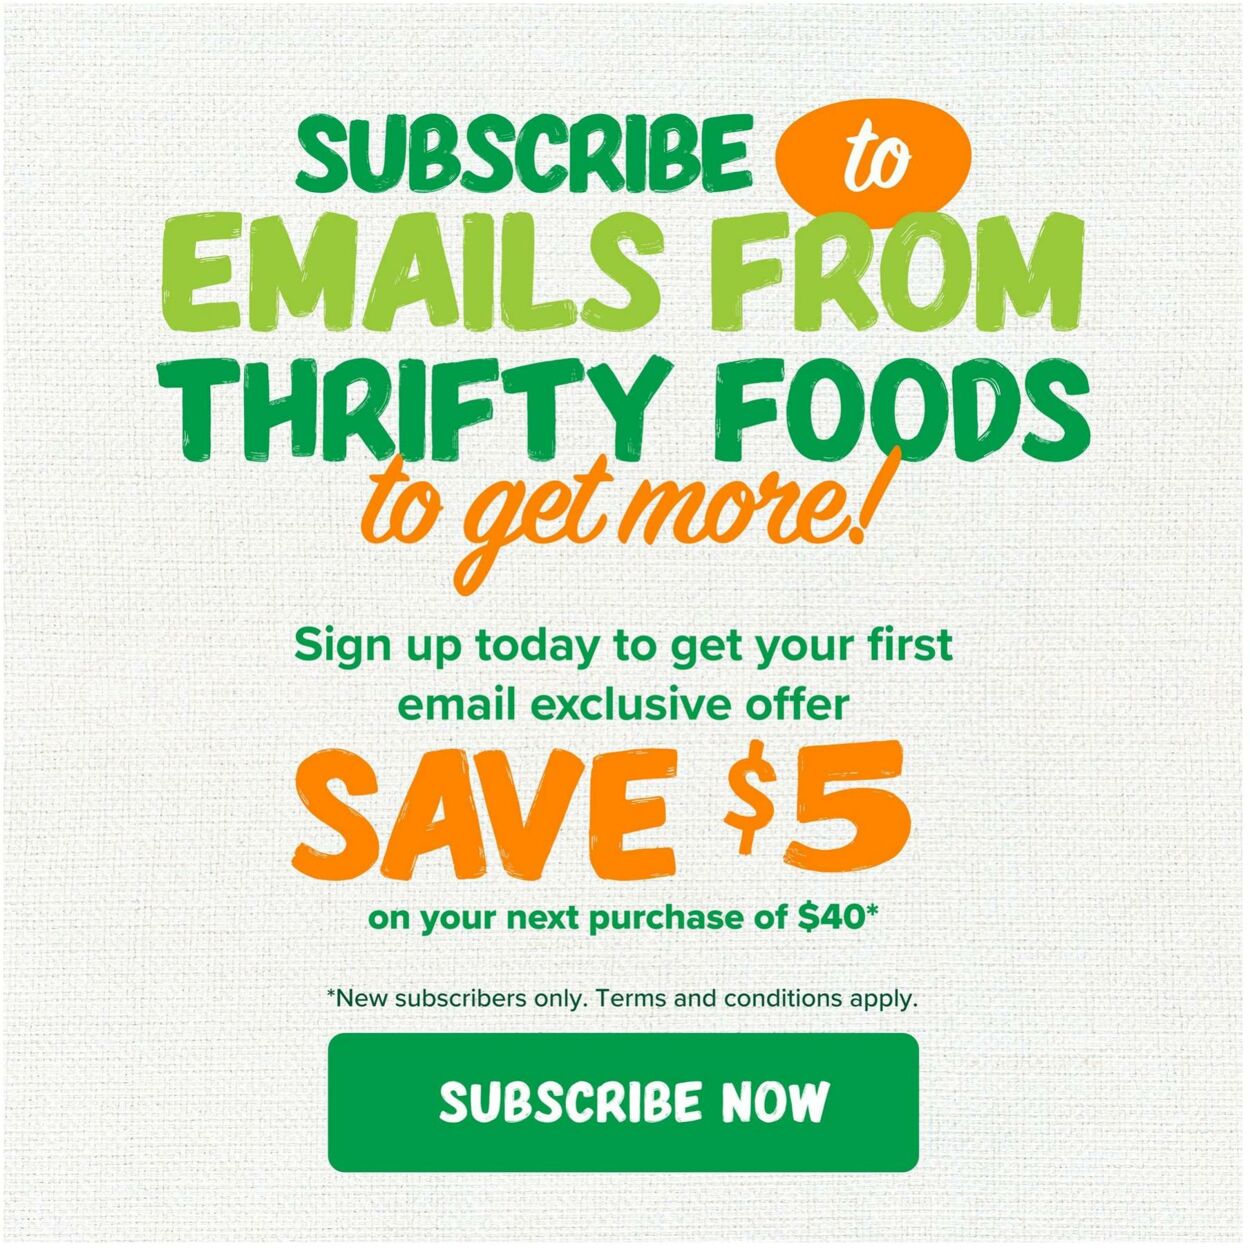 Circulaire Thrifty Foods 09.02.2023 - 15.02.2023